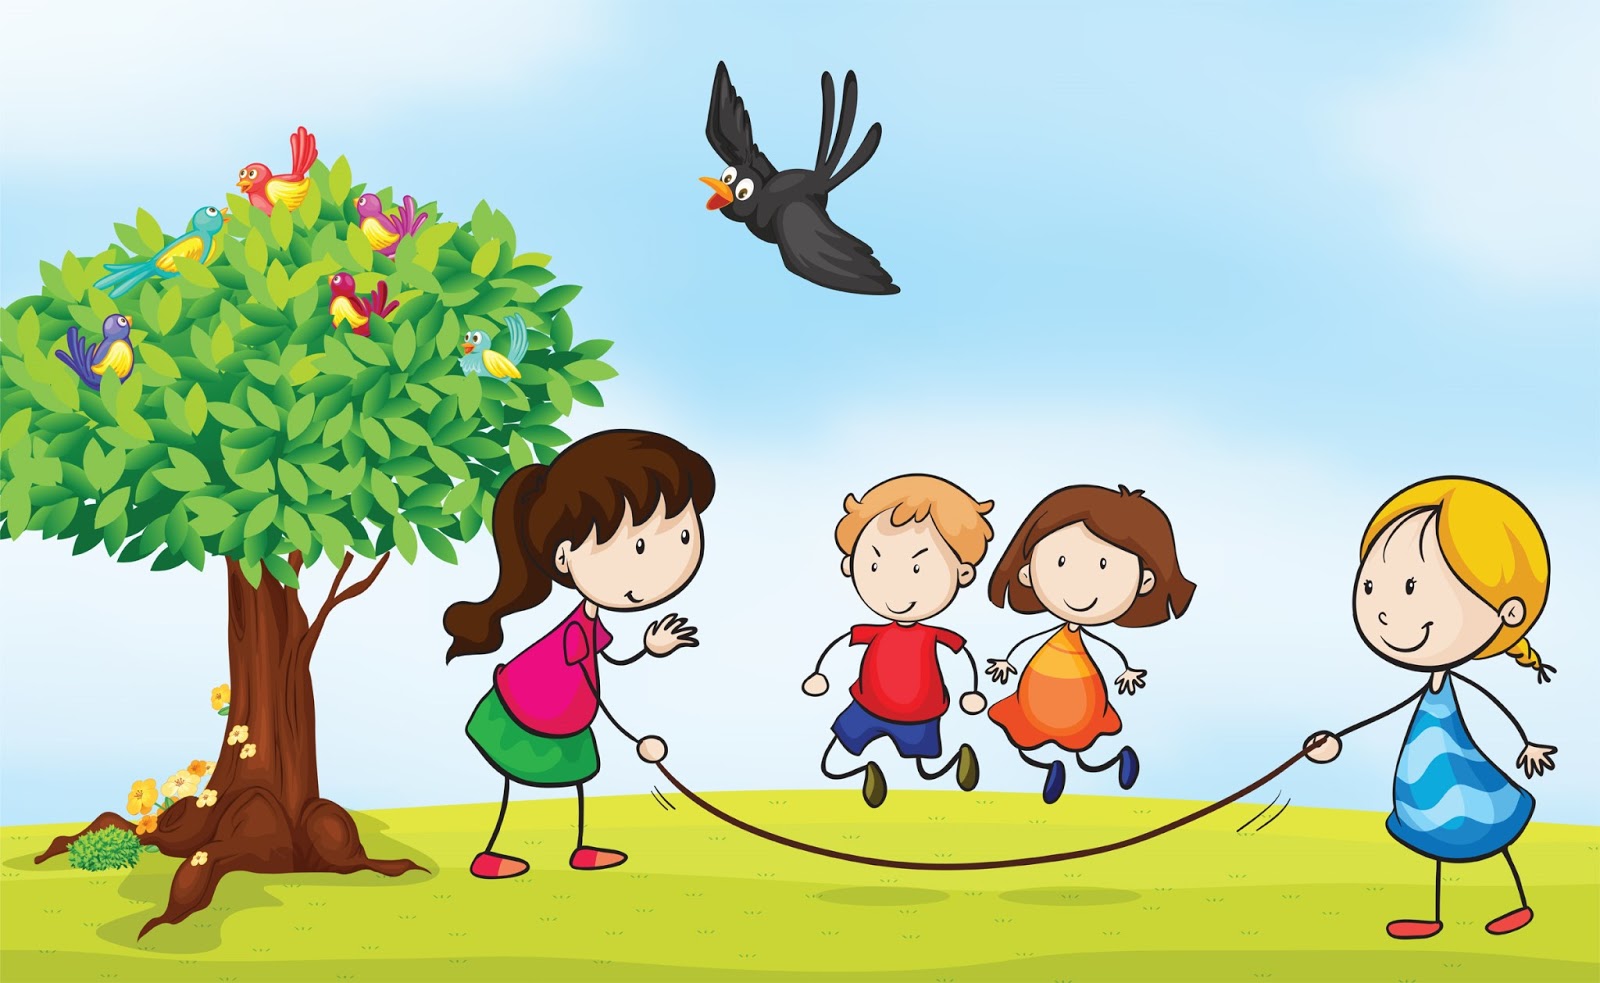 children playing clipart blac